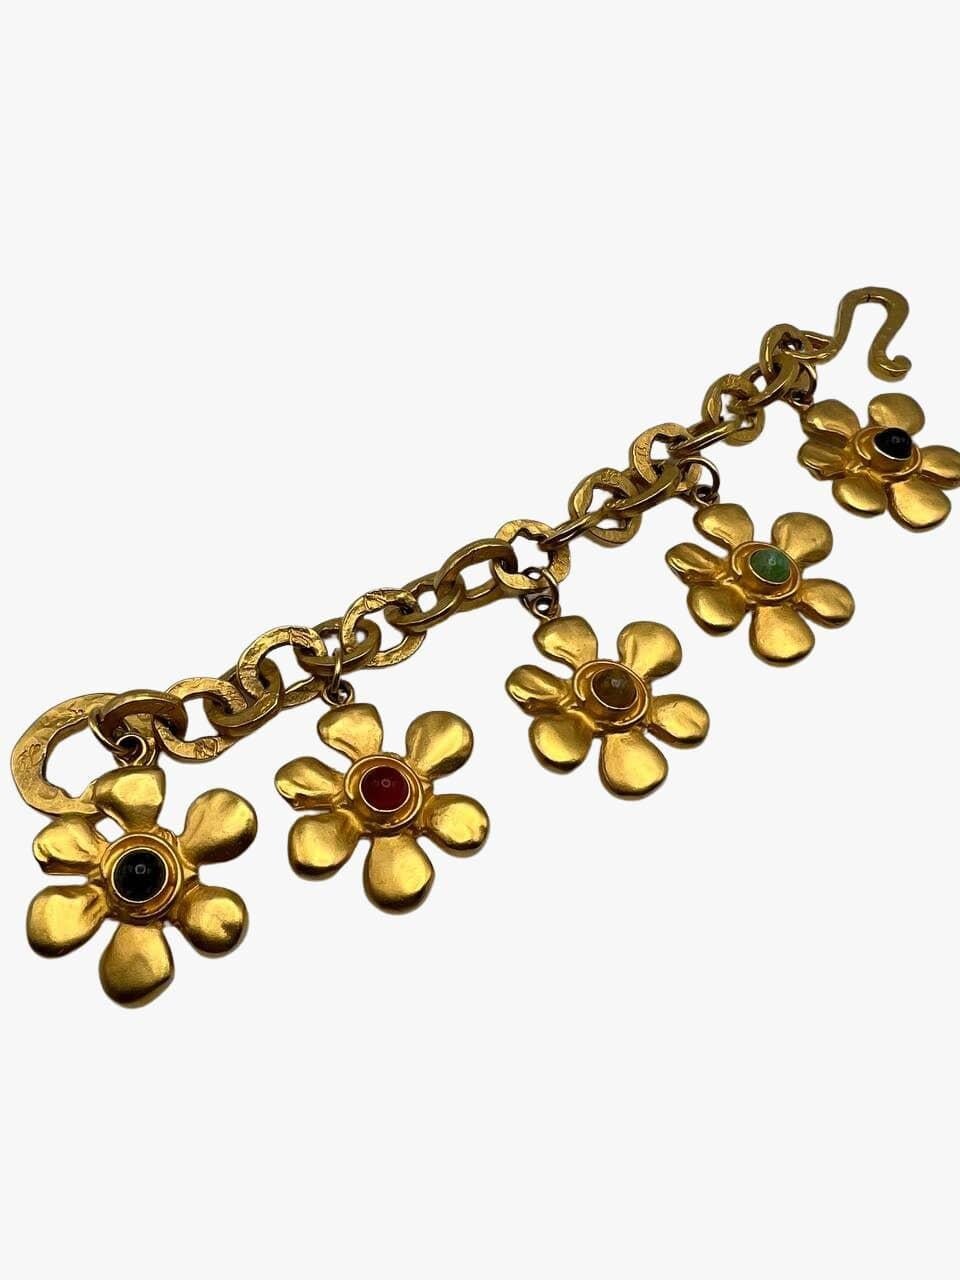 Vintage Karl Lagerfeld 24k gold plated bracelet features 5 oversized dangling daisy flowers centered with glass cabochons, each different color. 
KL monograms on each link. 

Signed.

Period: 1980s

Condition: excellent. No visible signs of wear.